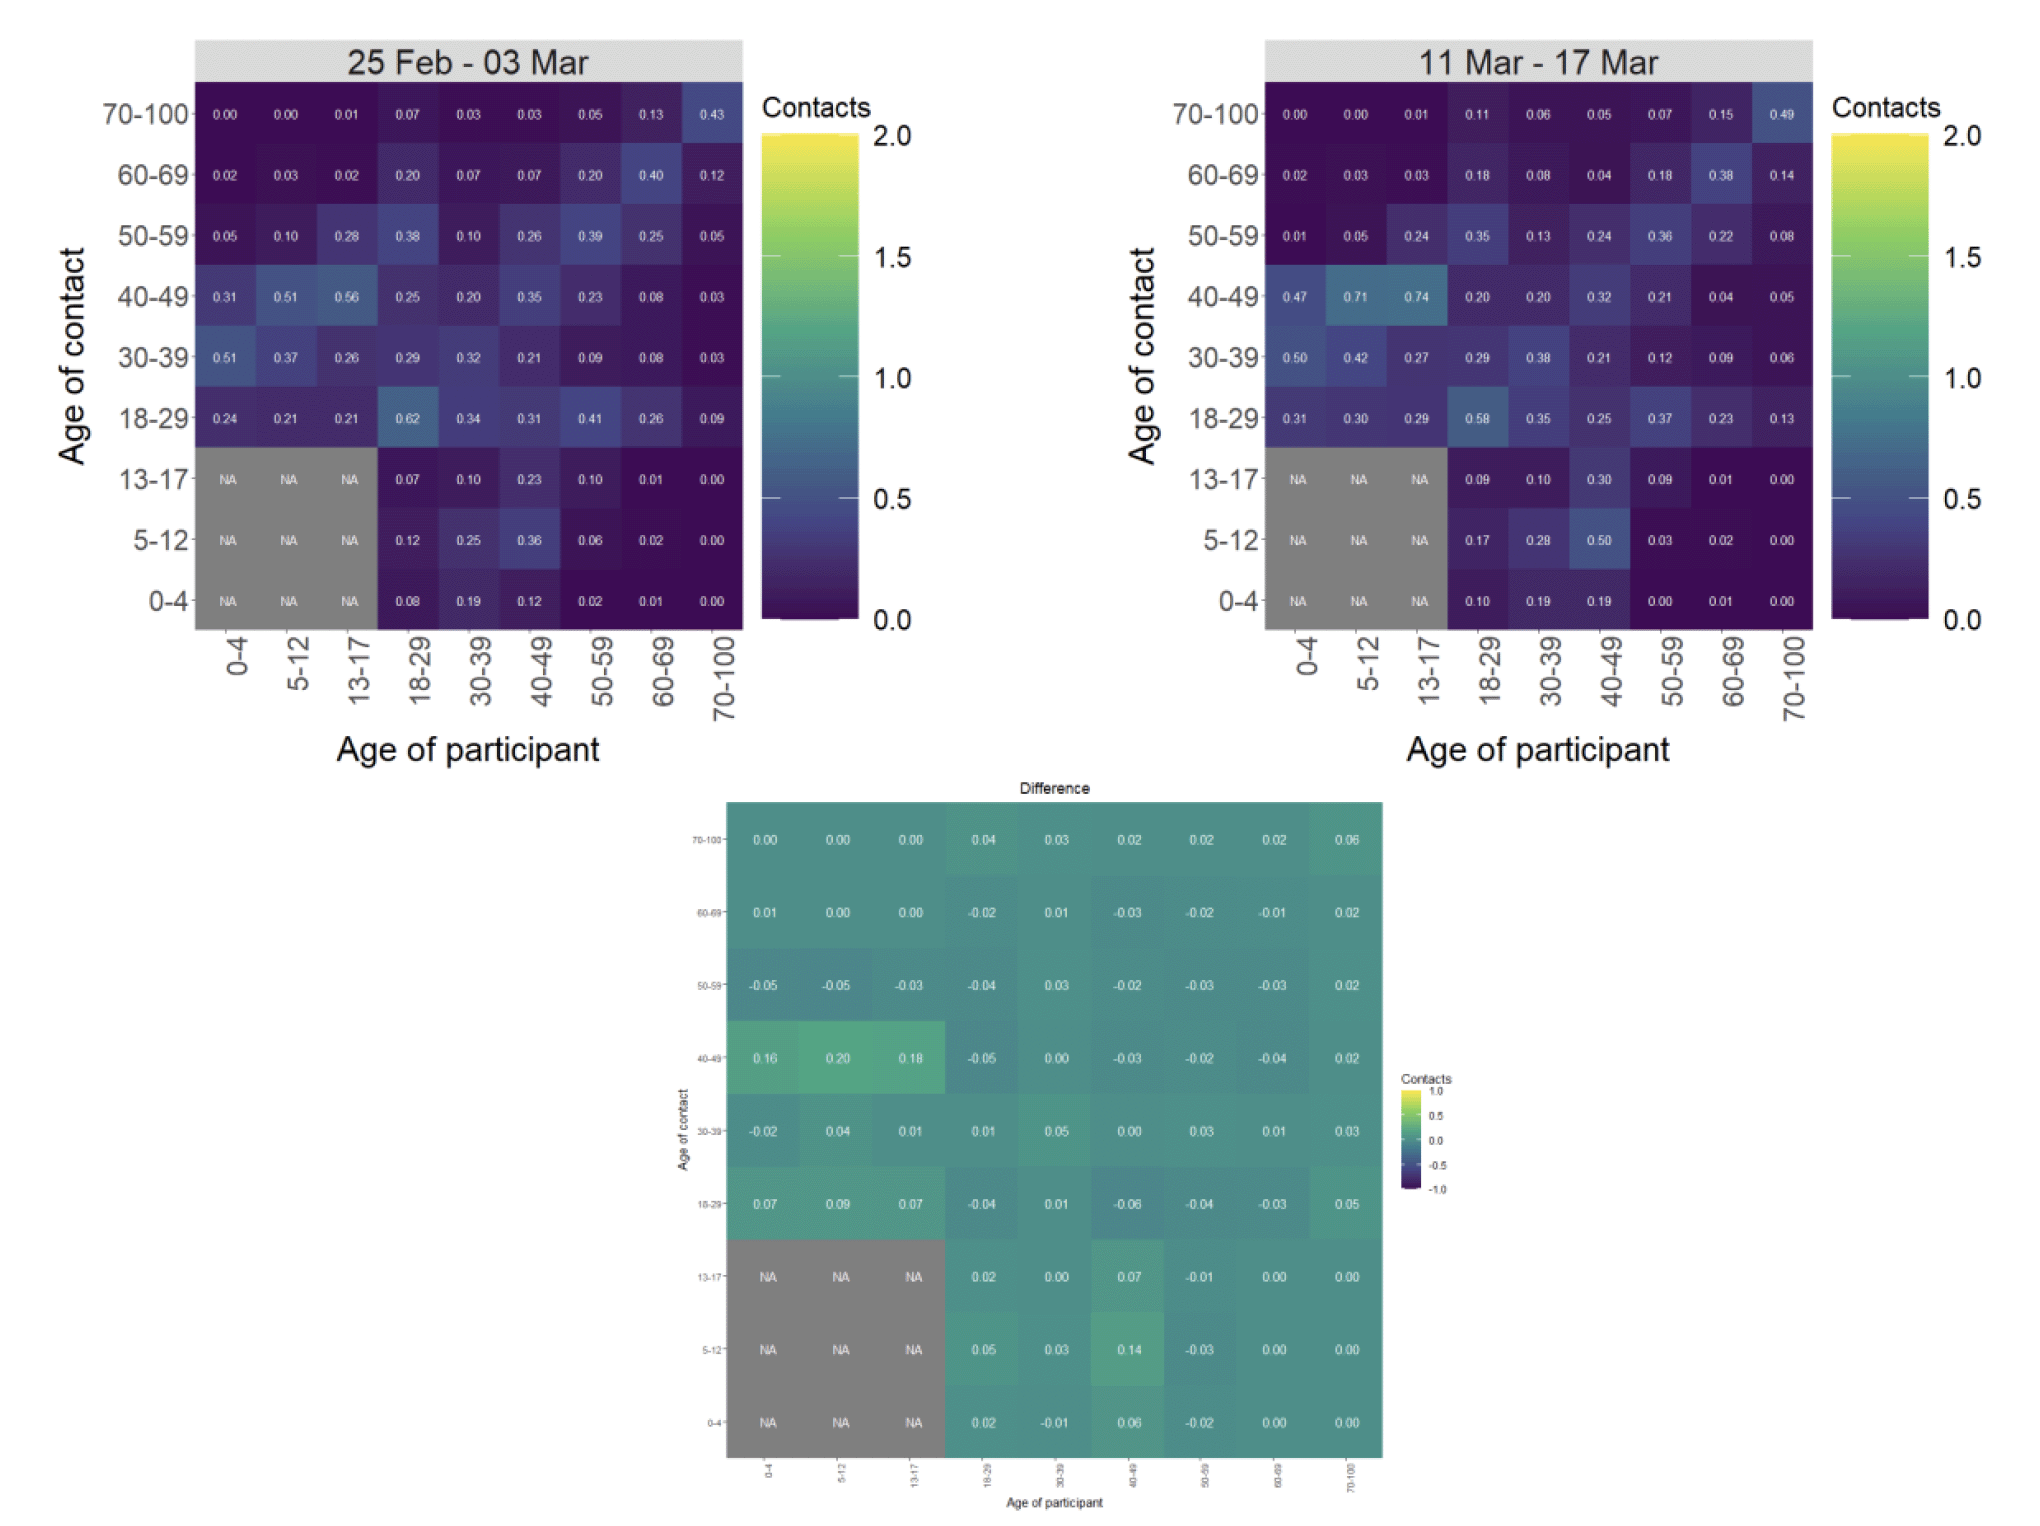 Heat maps showing the mean contacts by age group in the weeks of 25 Feb and 11 Mar.